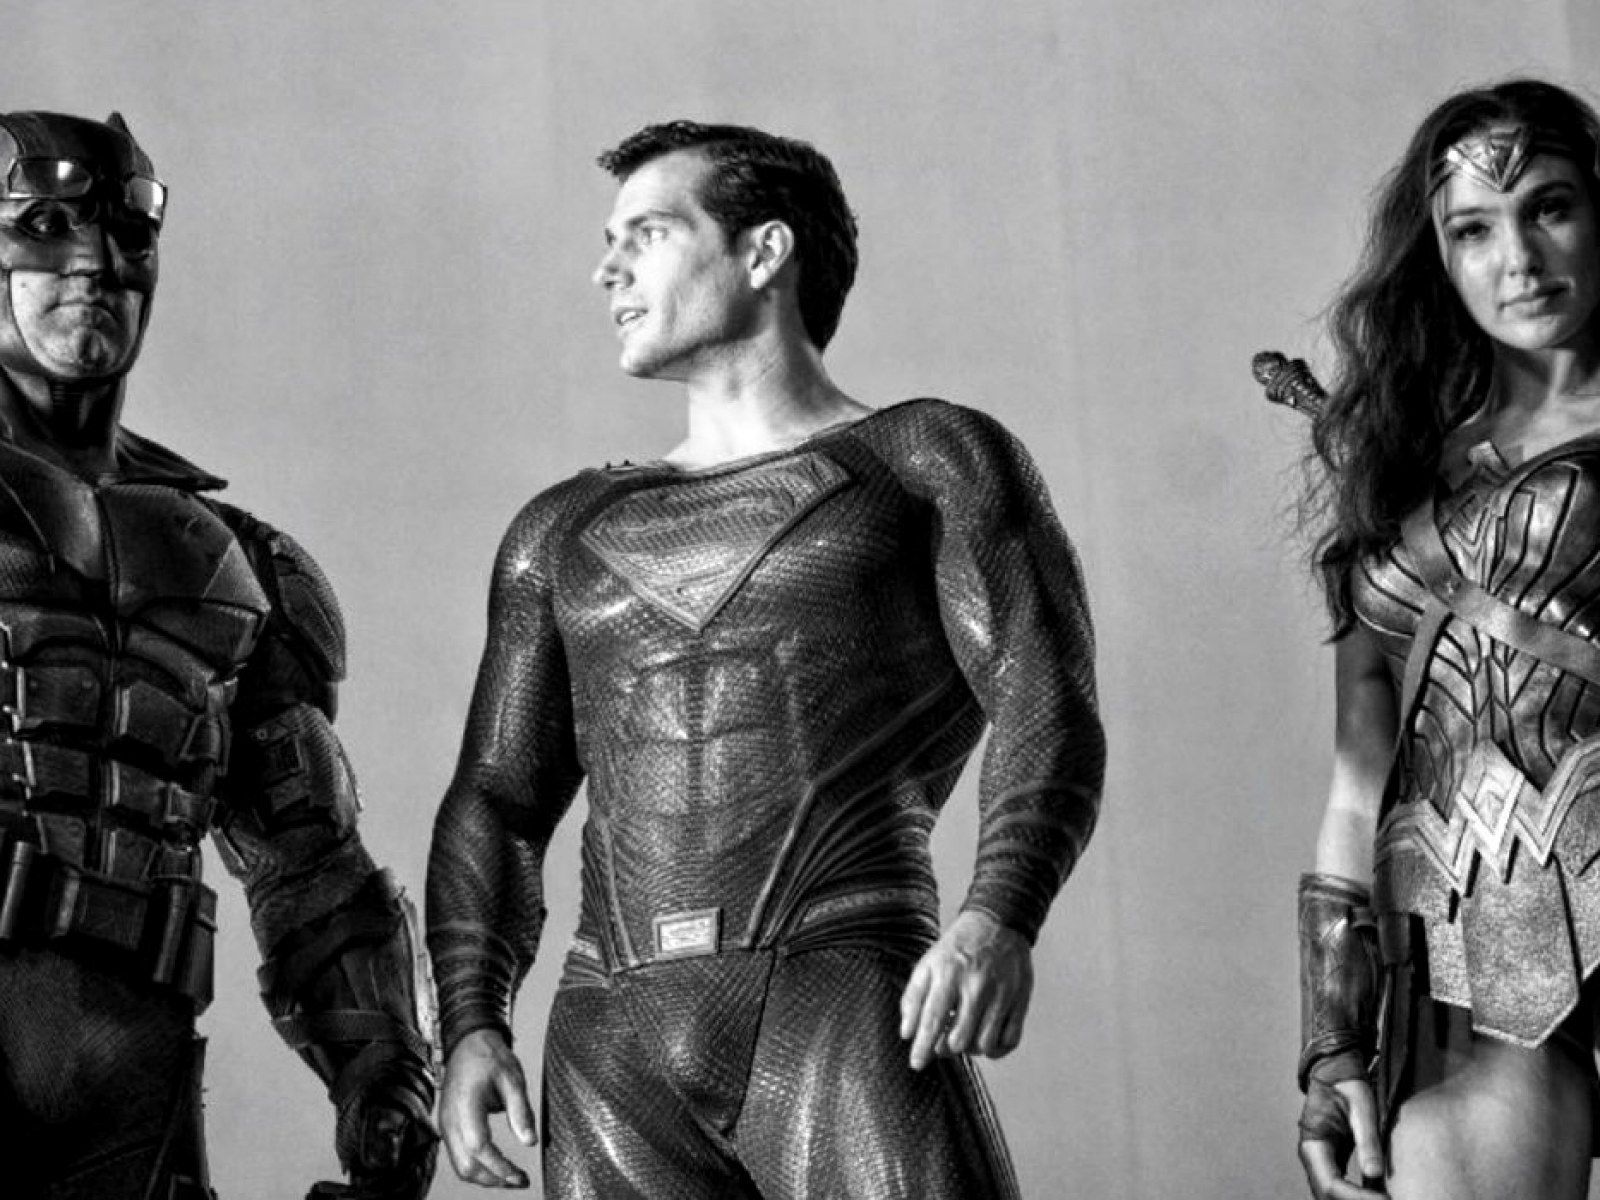 Zack Snyder's 'Justice League' Reveal Hints at New Scenes for Superman, Batman and Martian Manhunter